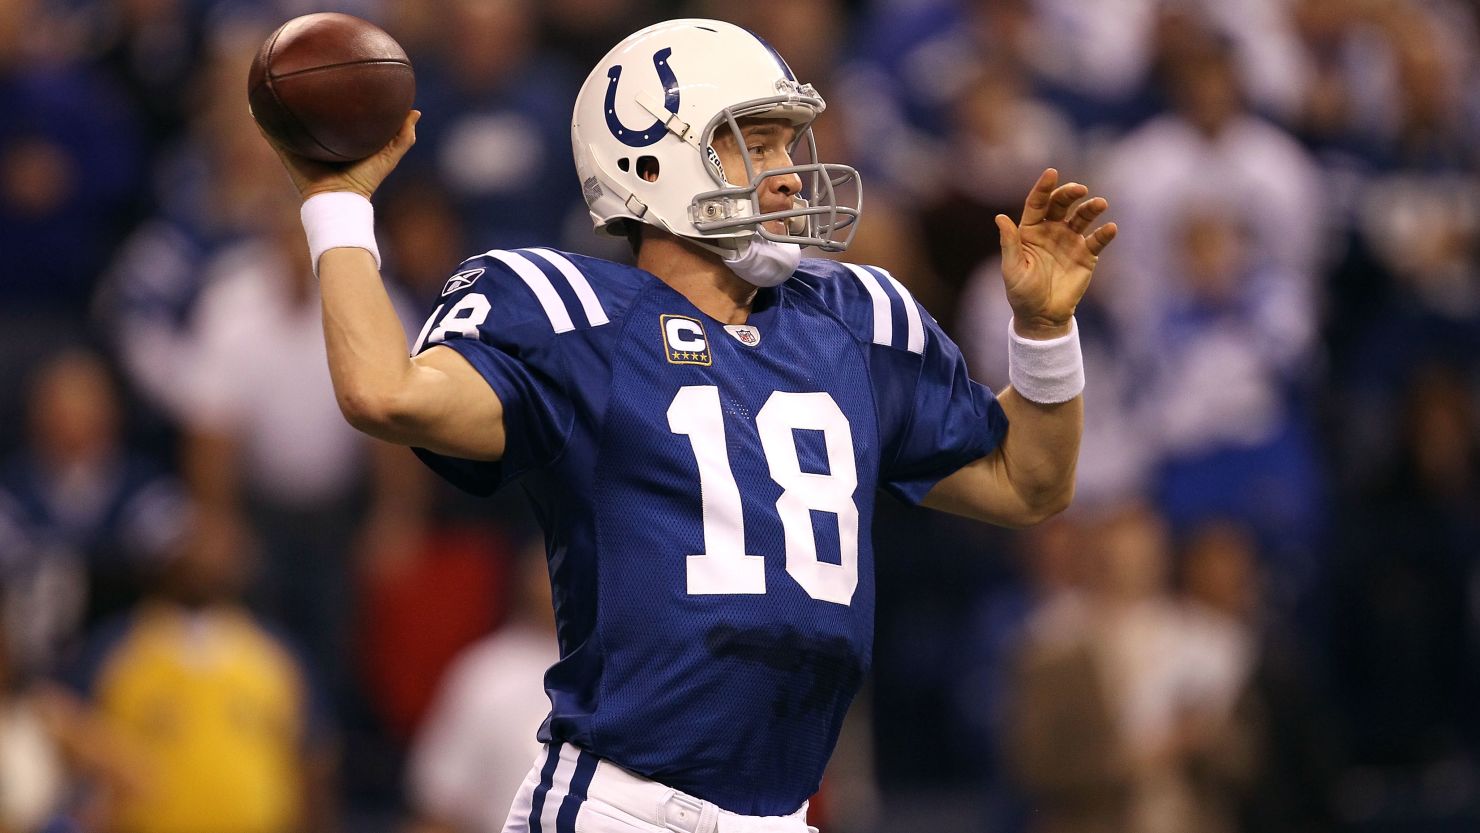 Peyton Manning spent 14 seasons with the Indianapolis Colts but was released this month before a large bonus was due.